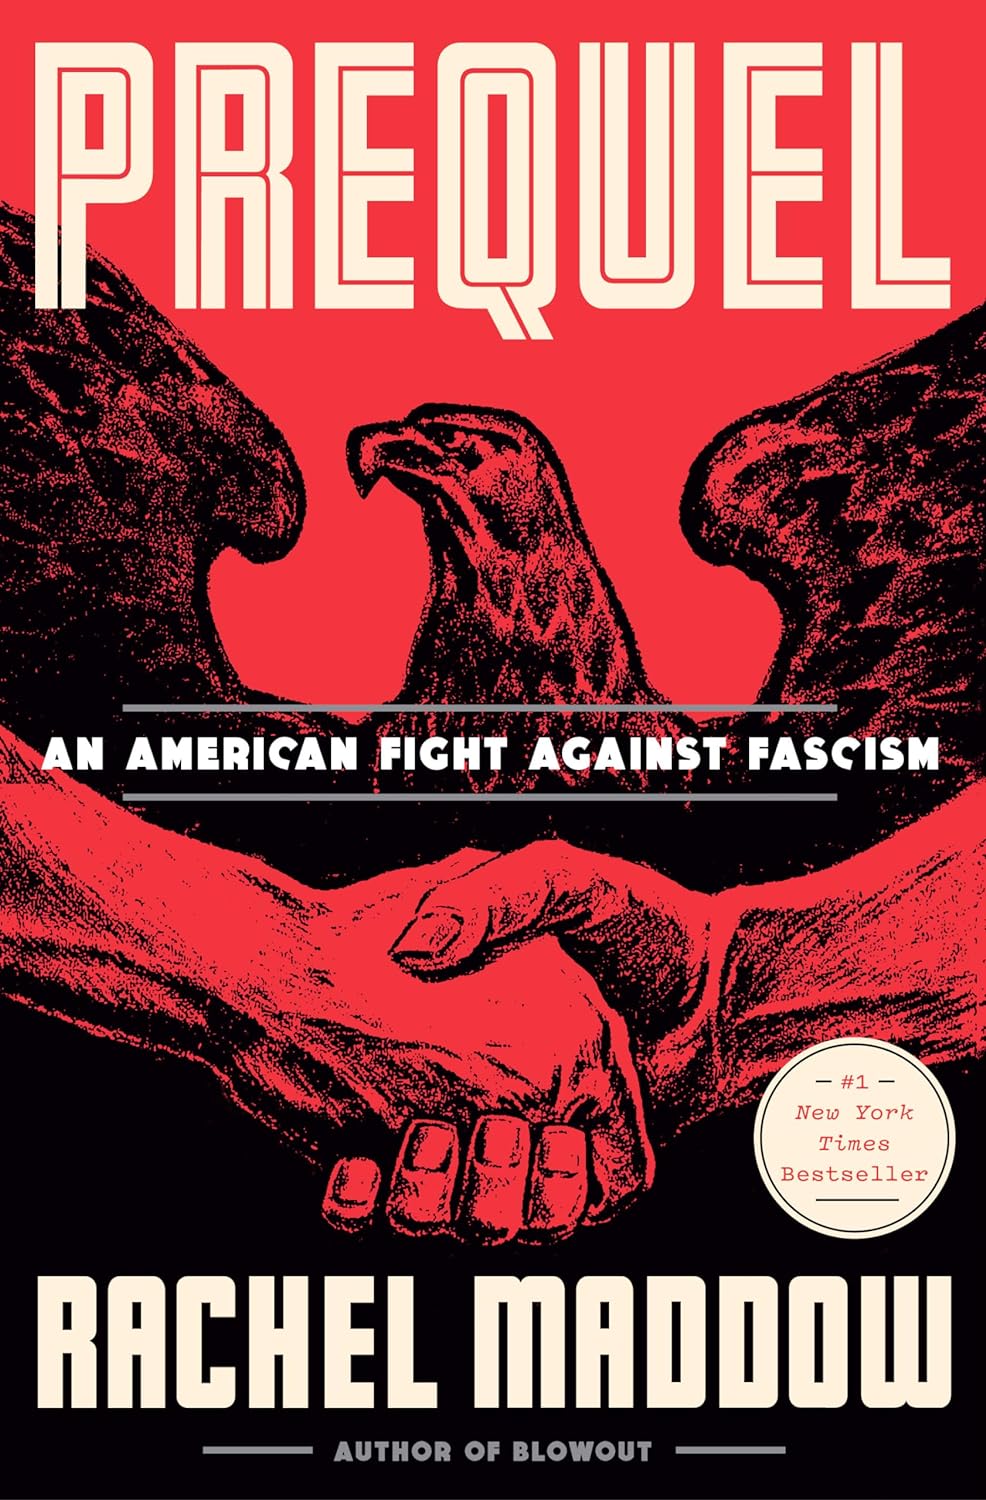 Rachel Maddow: Prequel: An American Fight Against Fascism (Hardcover, Crown)